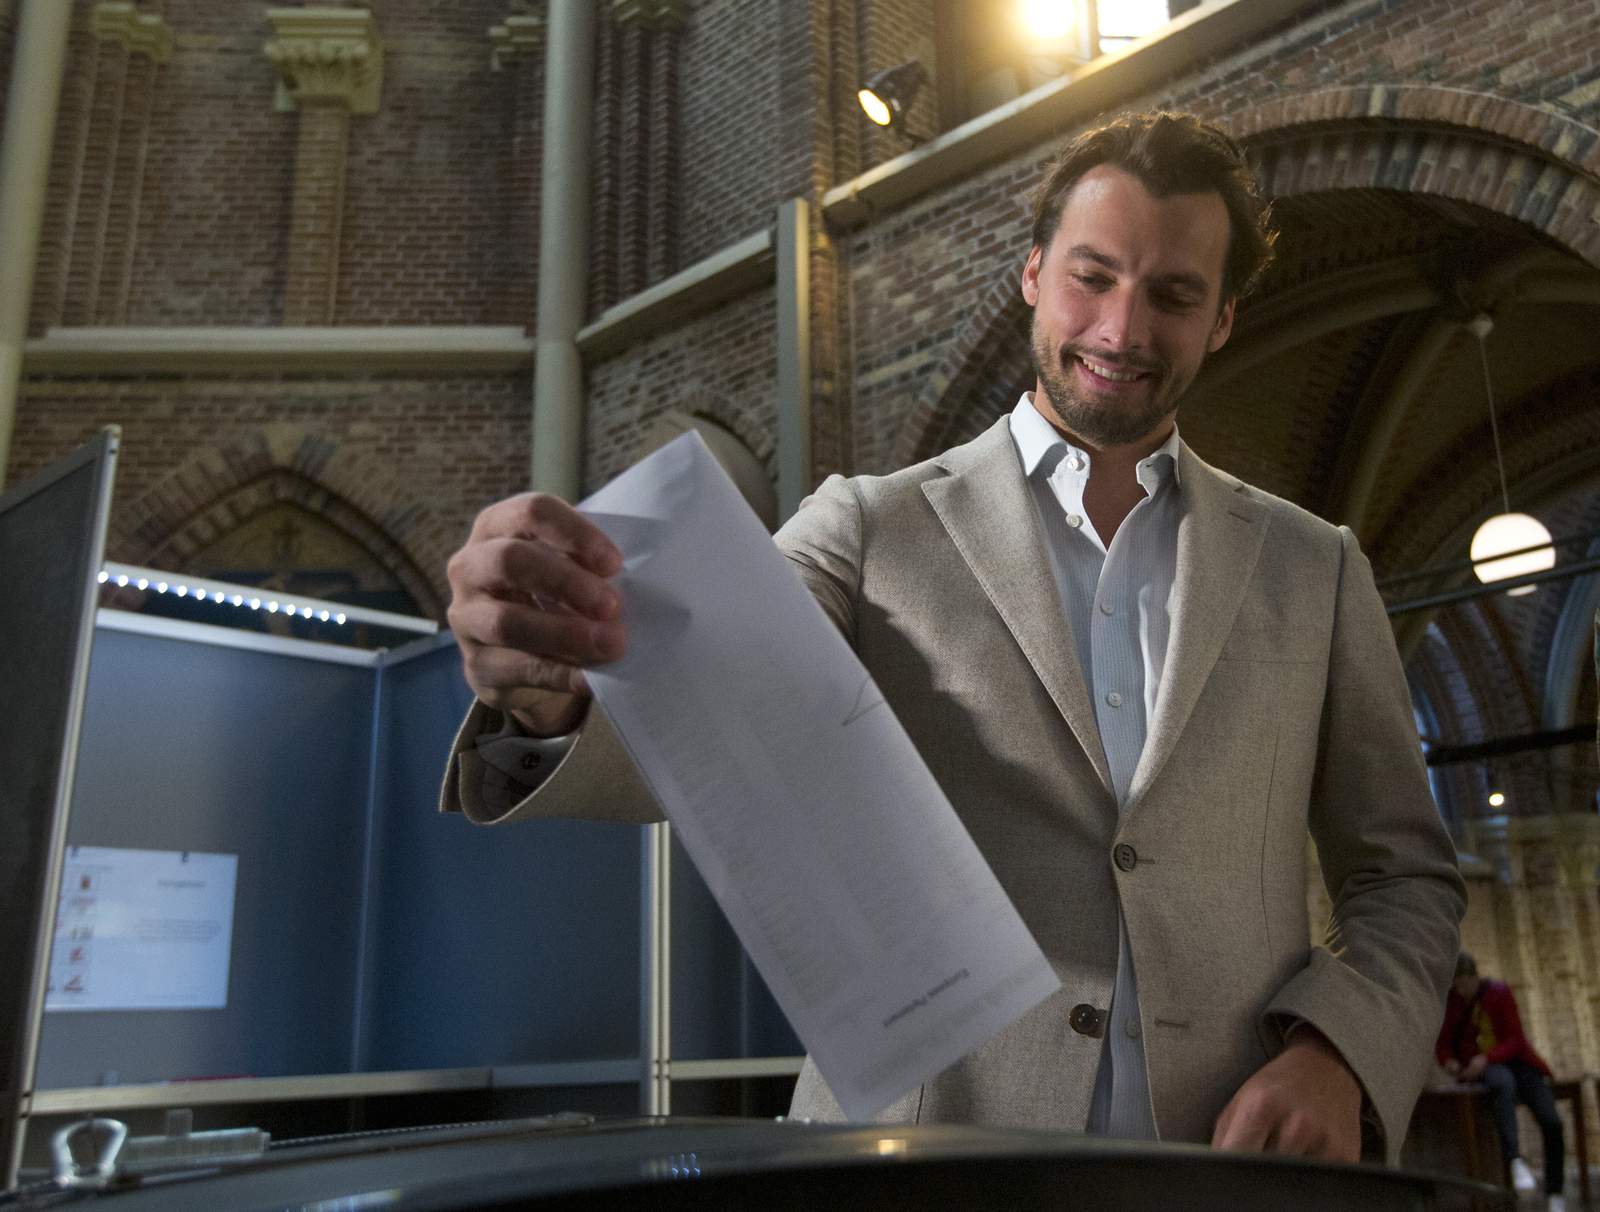 Dutch populist Baudet suggests splitting party he created